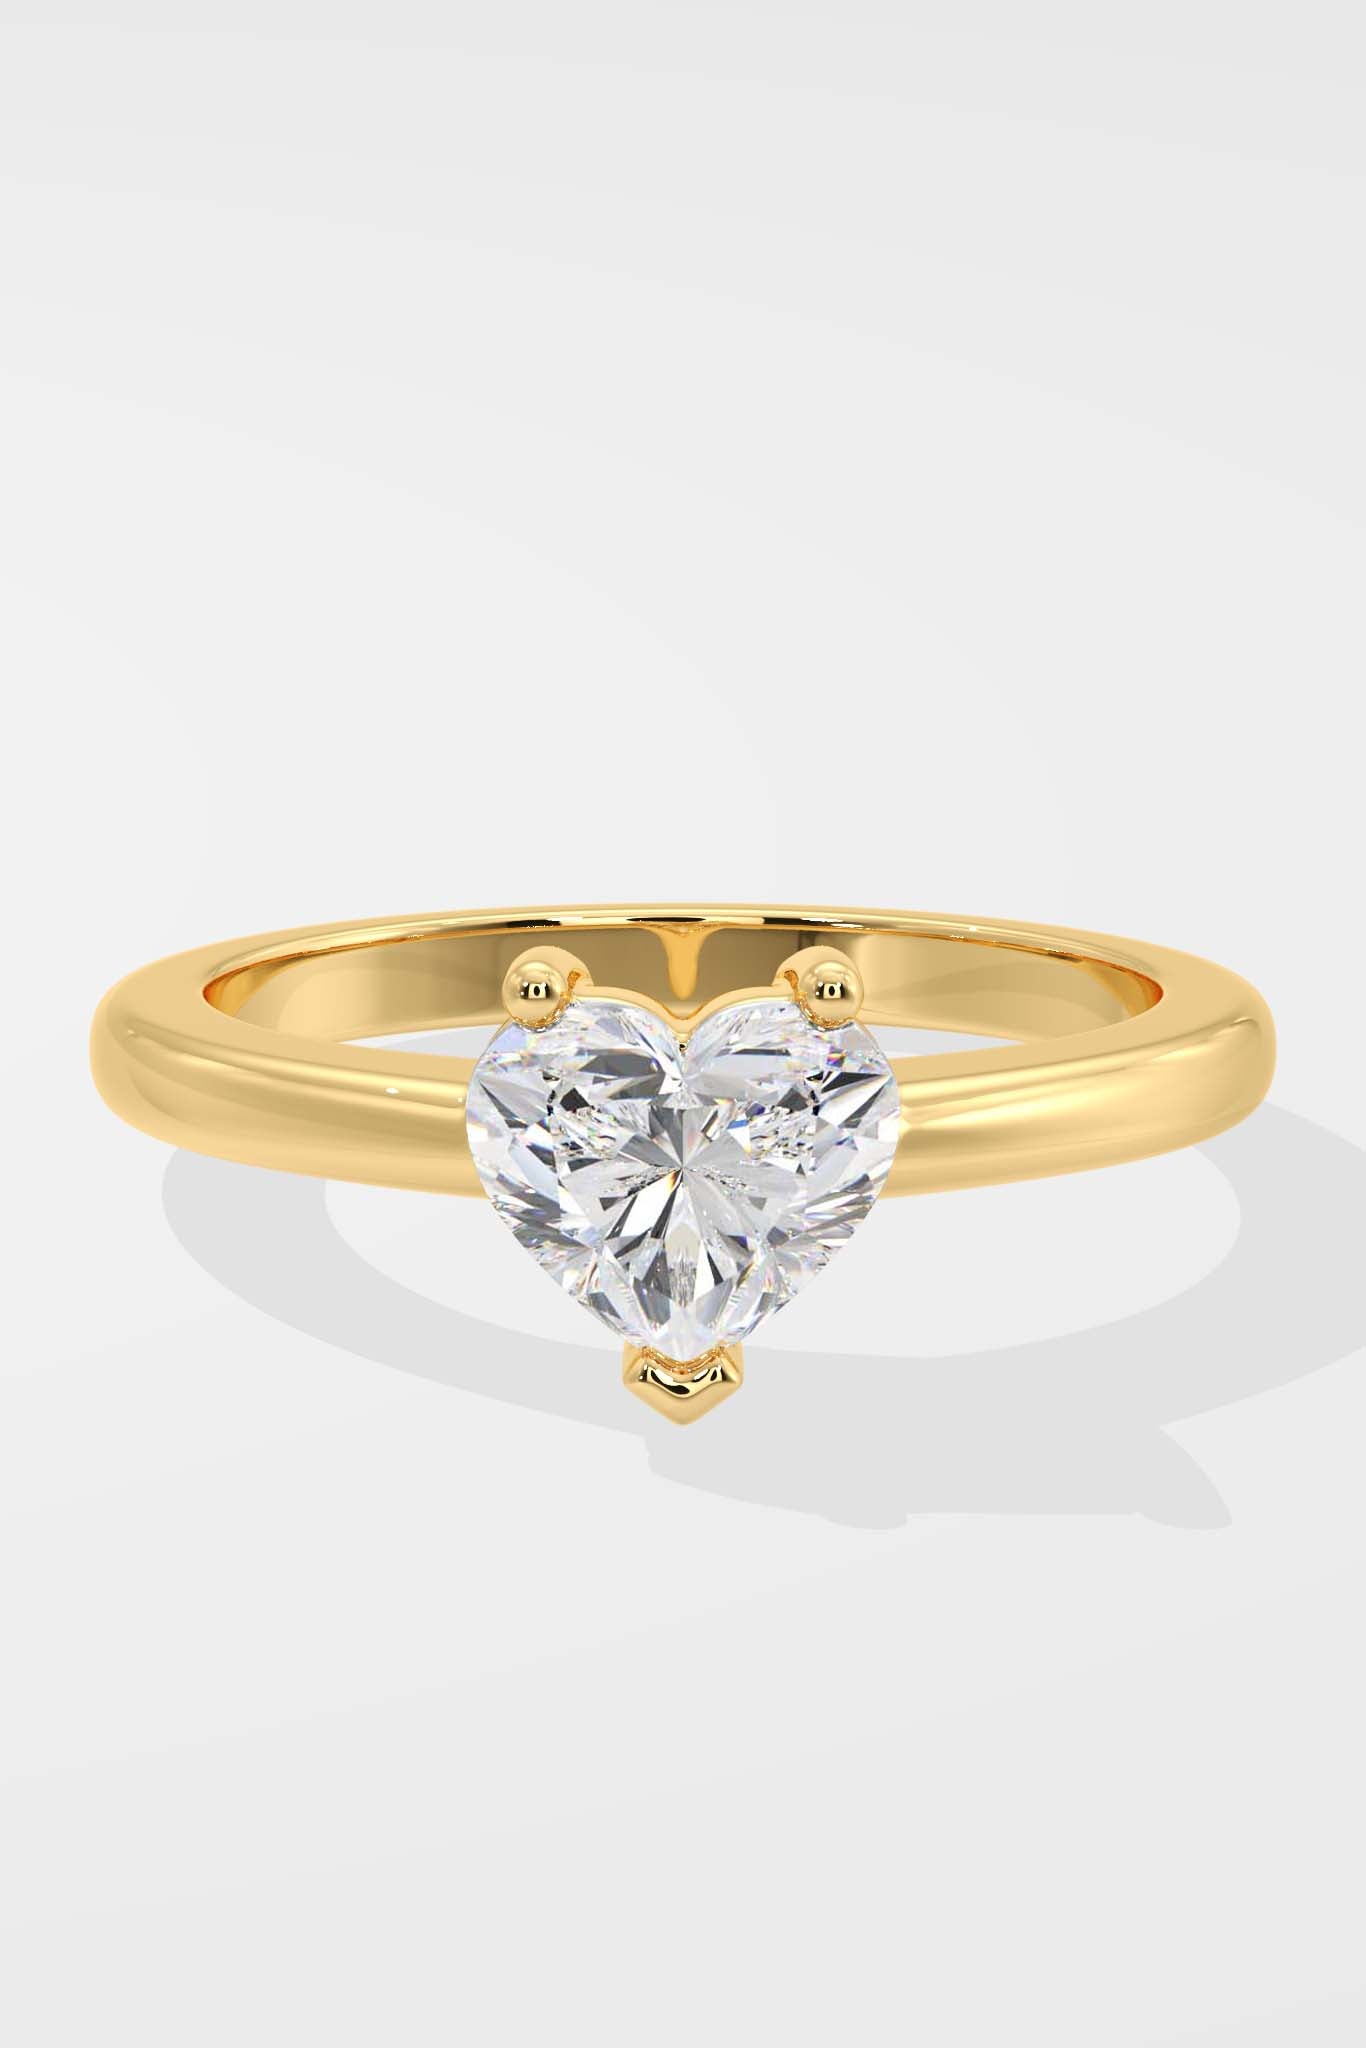 The One Heart Ring - House Of Quadri